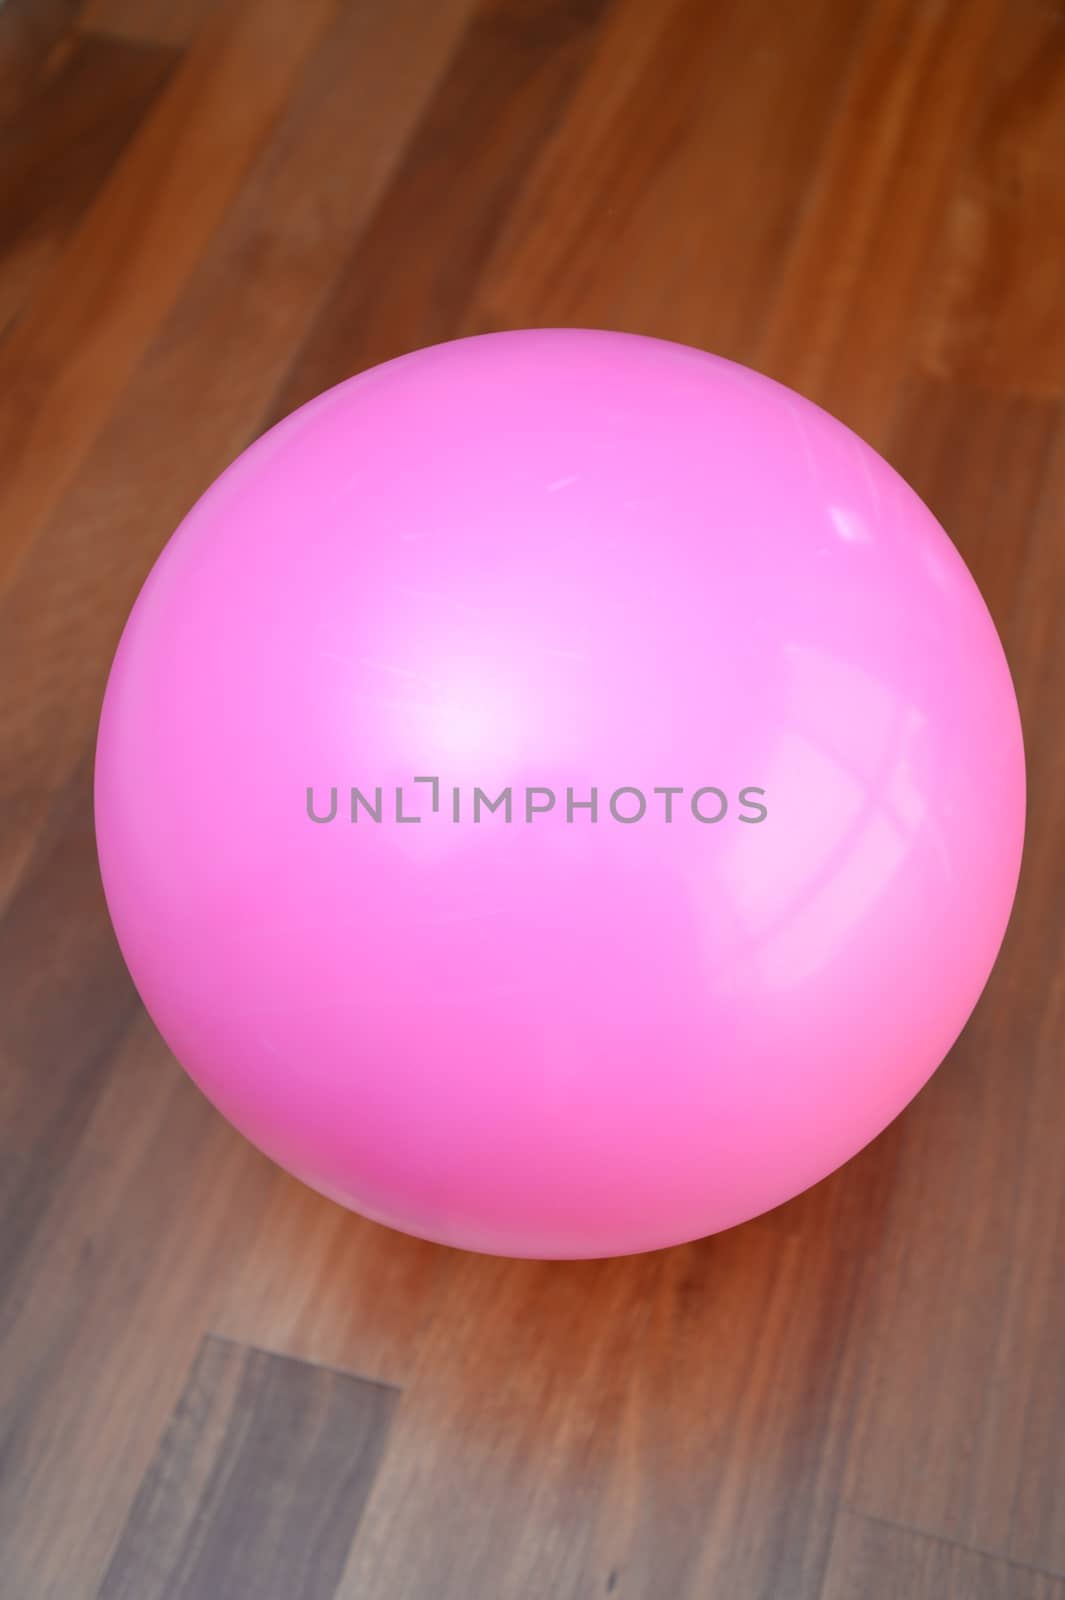 A close up shot of a fitness ball